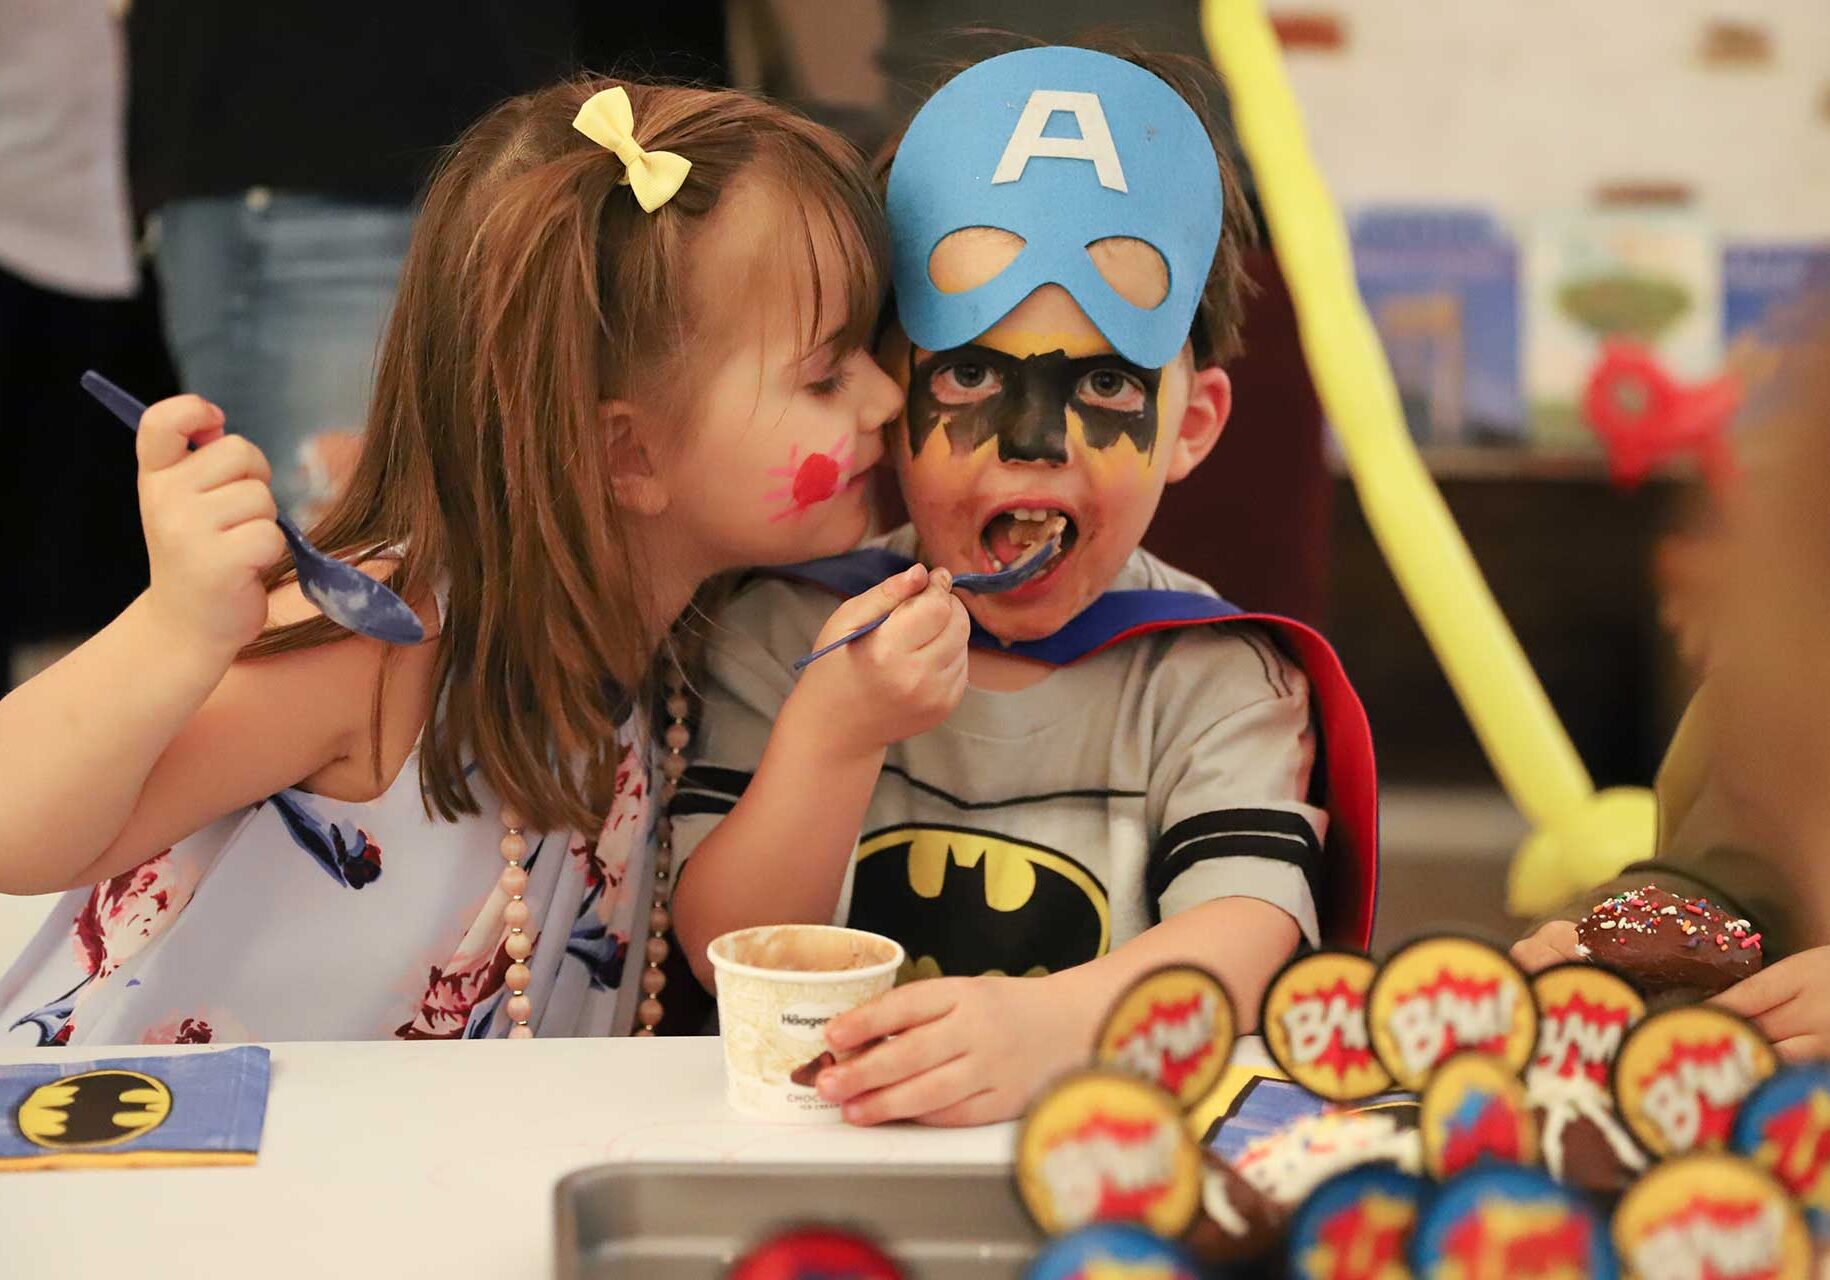 A boy and a girl wearing clown makeup and party clothes eating a dessert while the girl gives the boy a kiss on the cheek